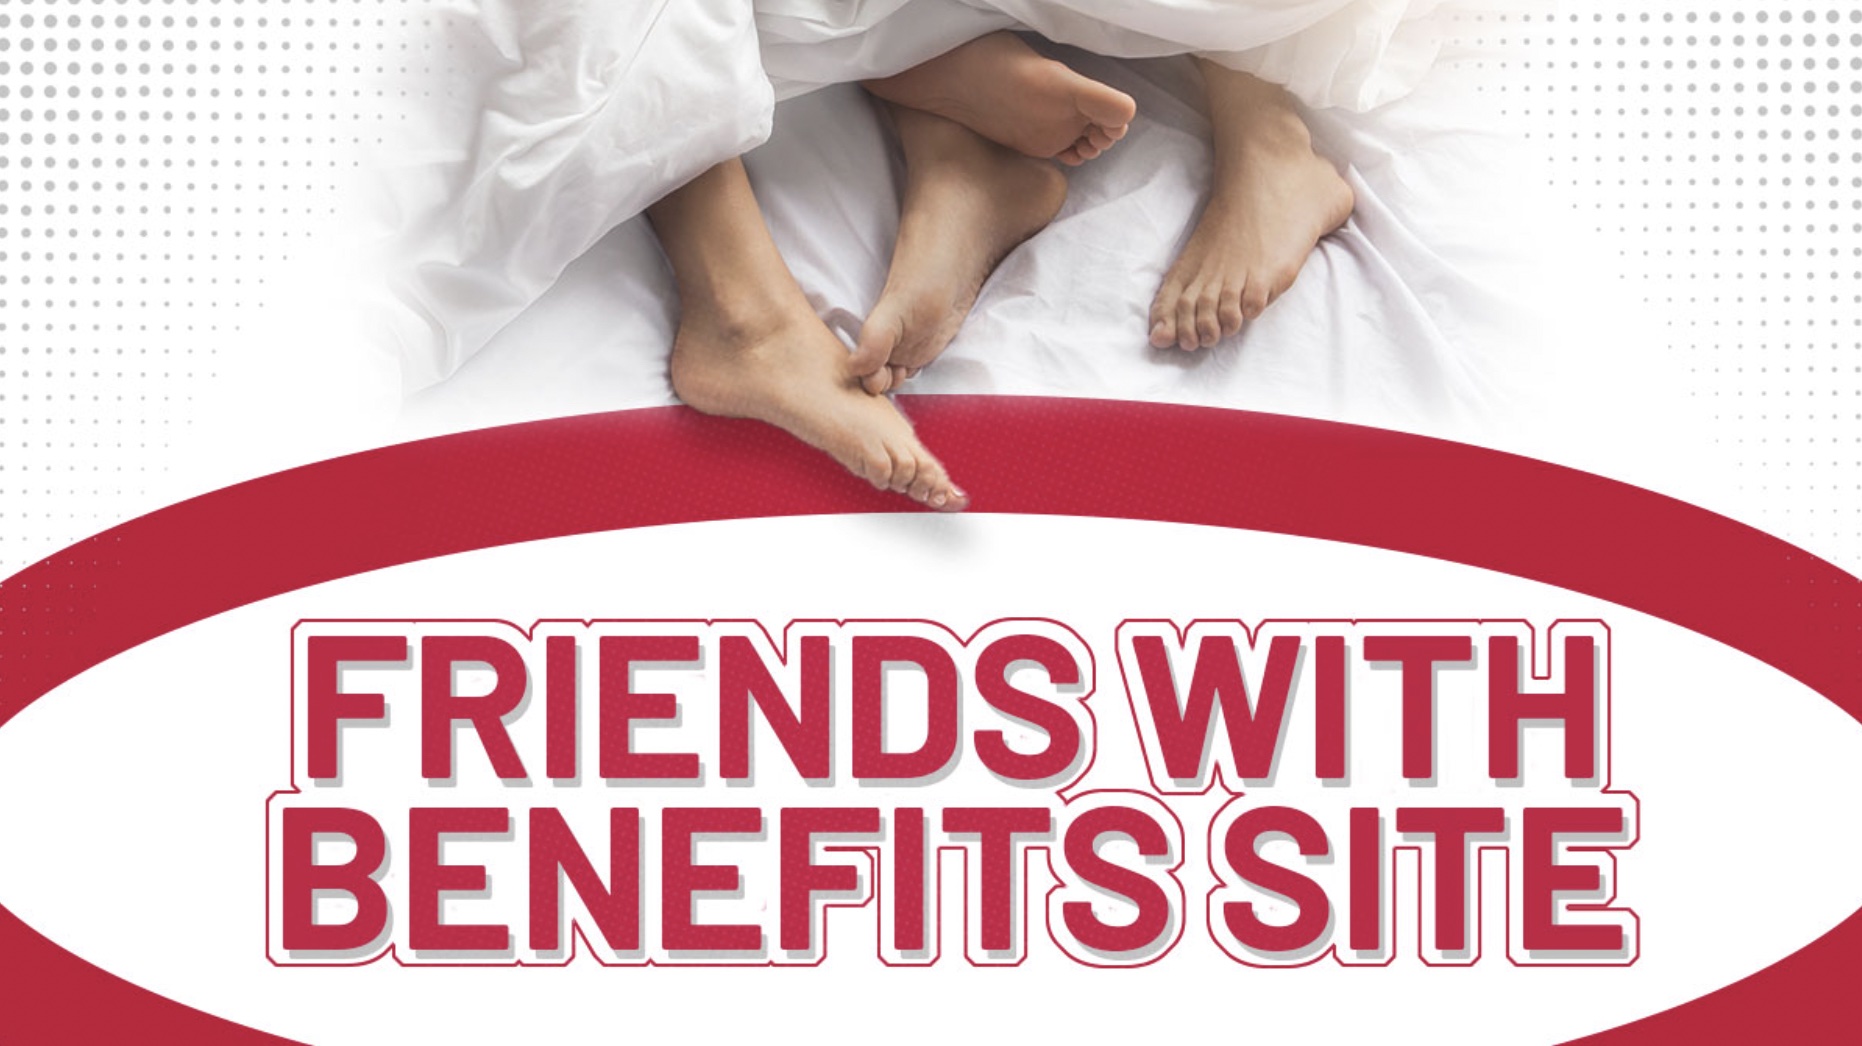 10 Friends With Benefits Sites for FWB Dating & Casual Fun